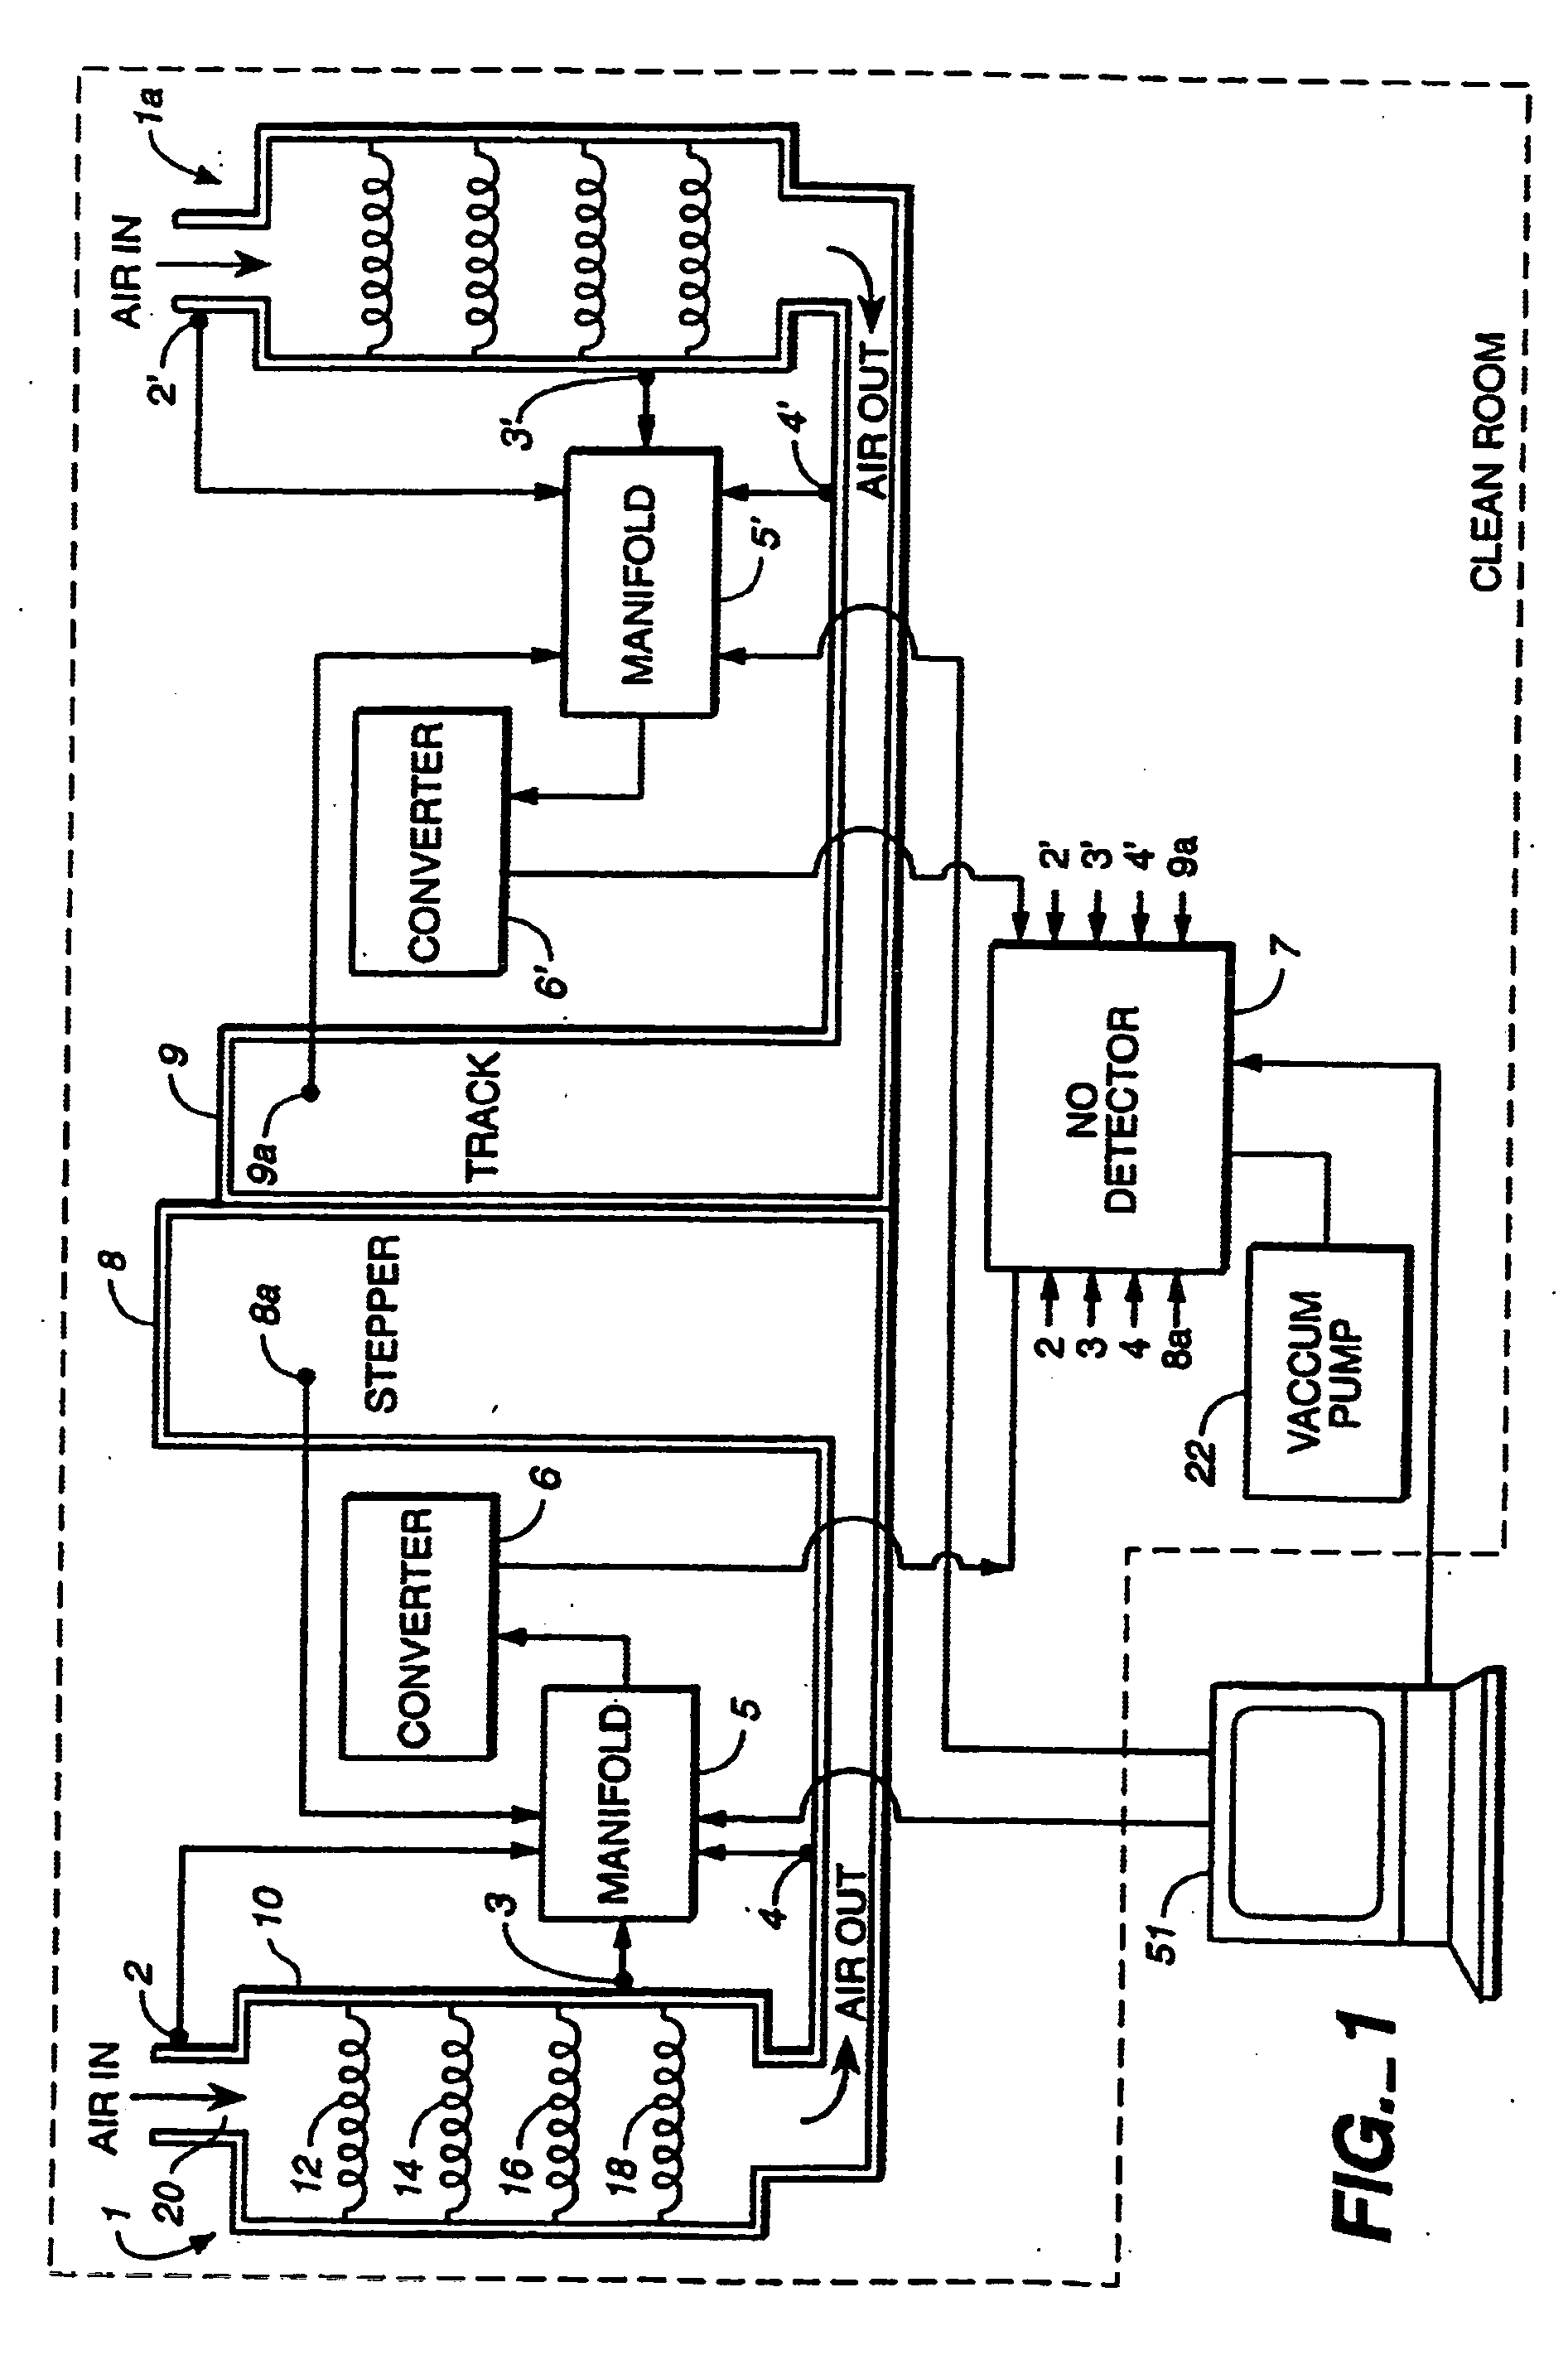 Protection of semiconductor fabrication and similar sensitive processes